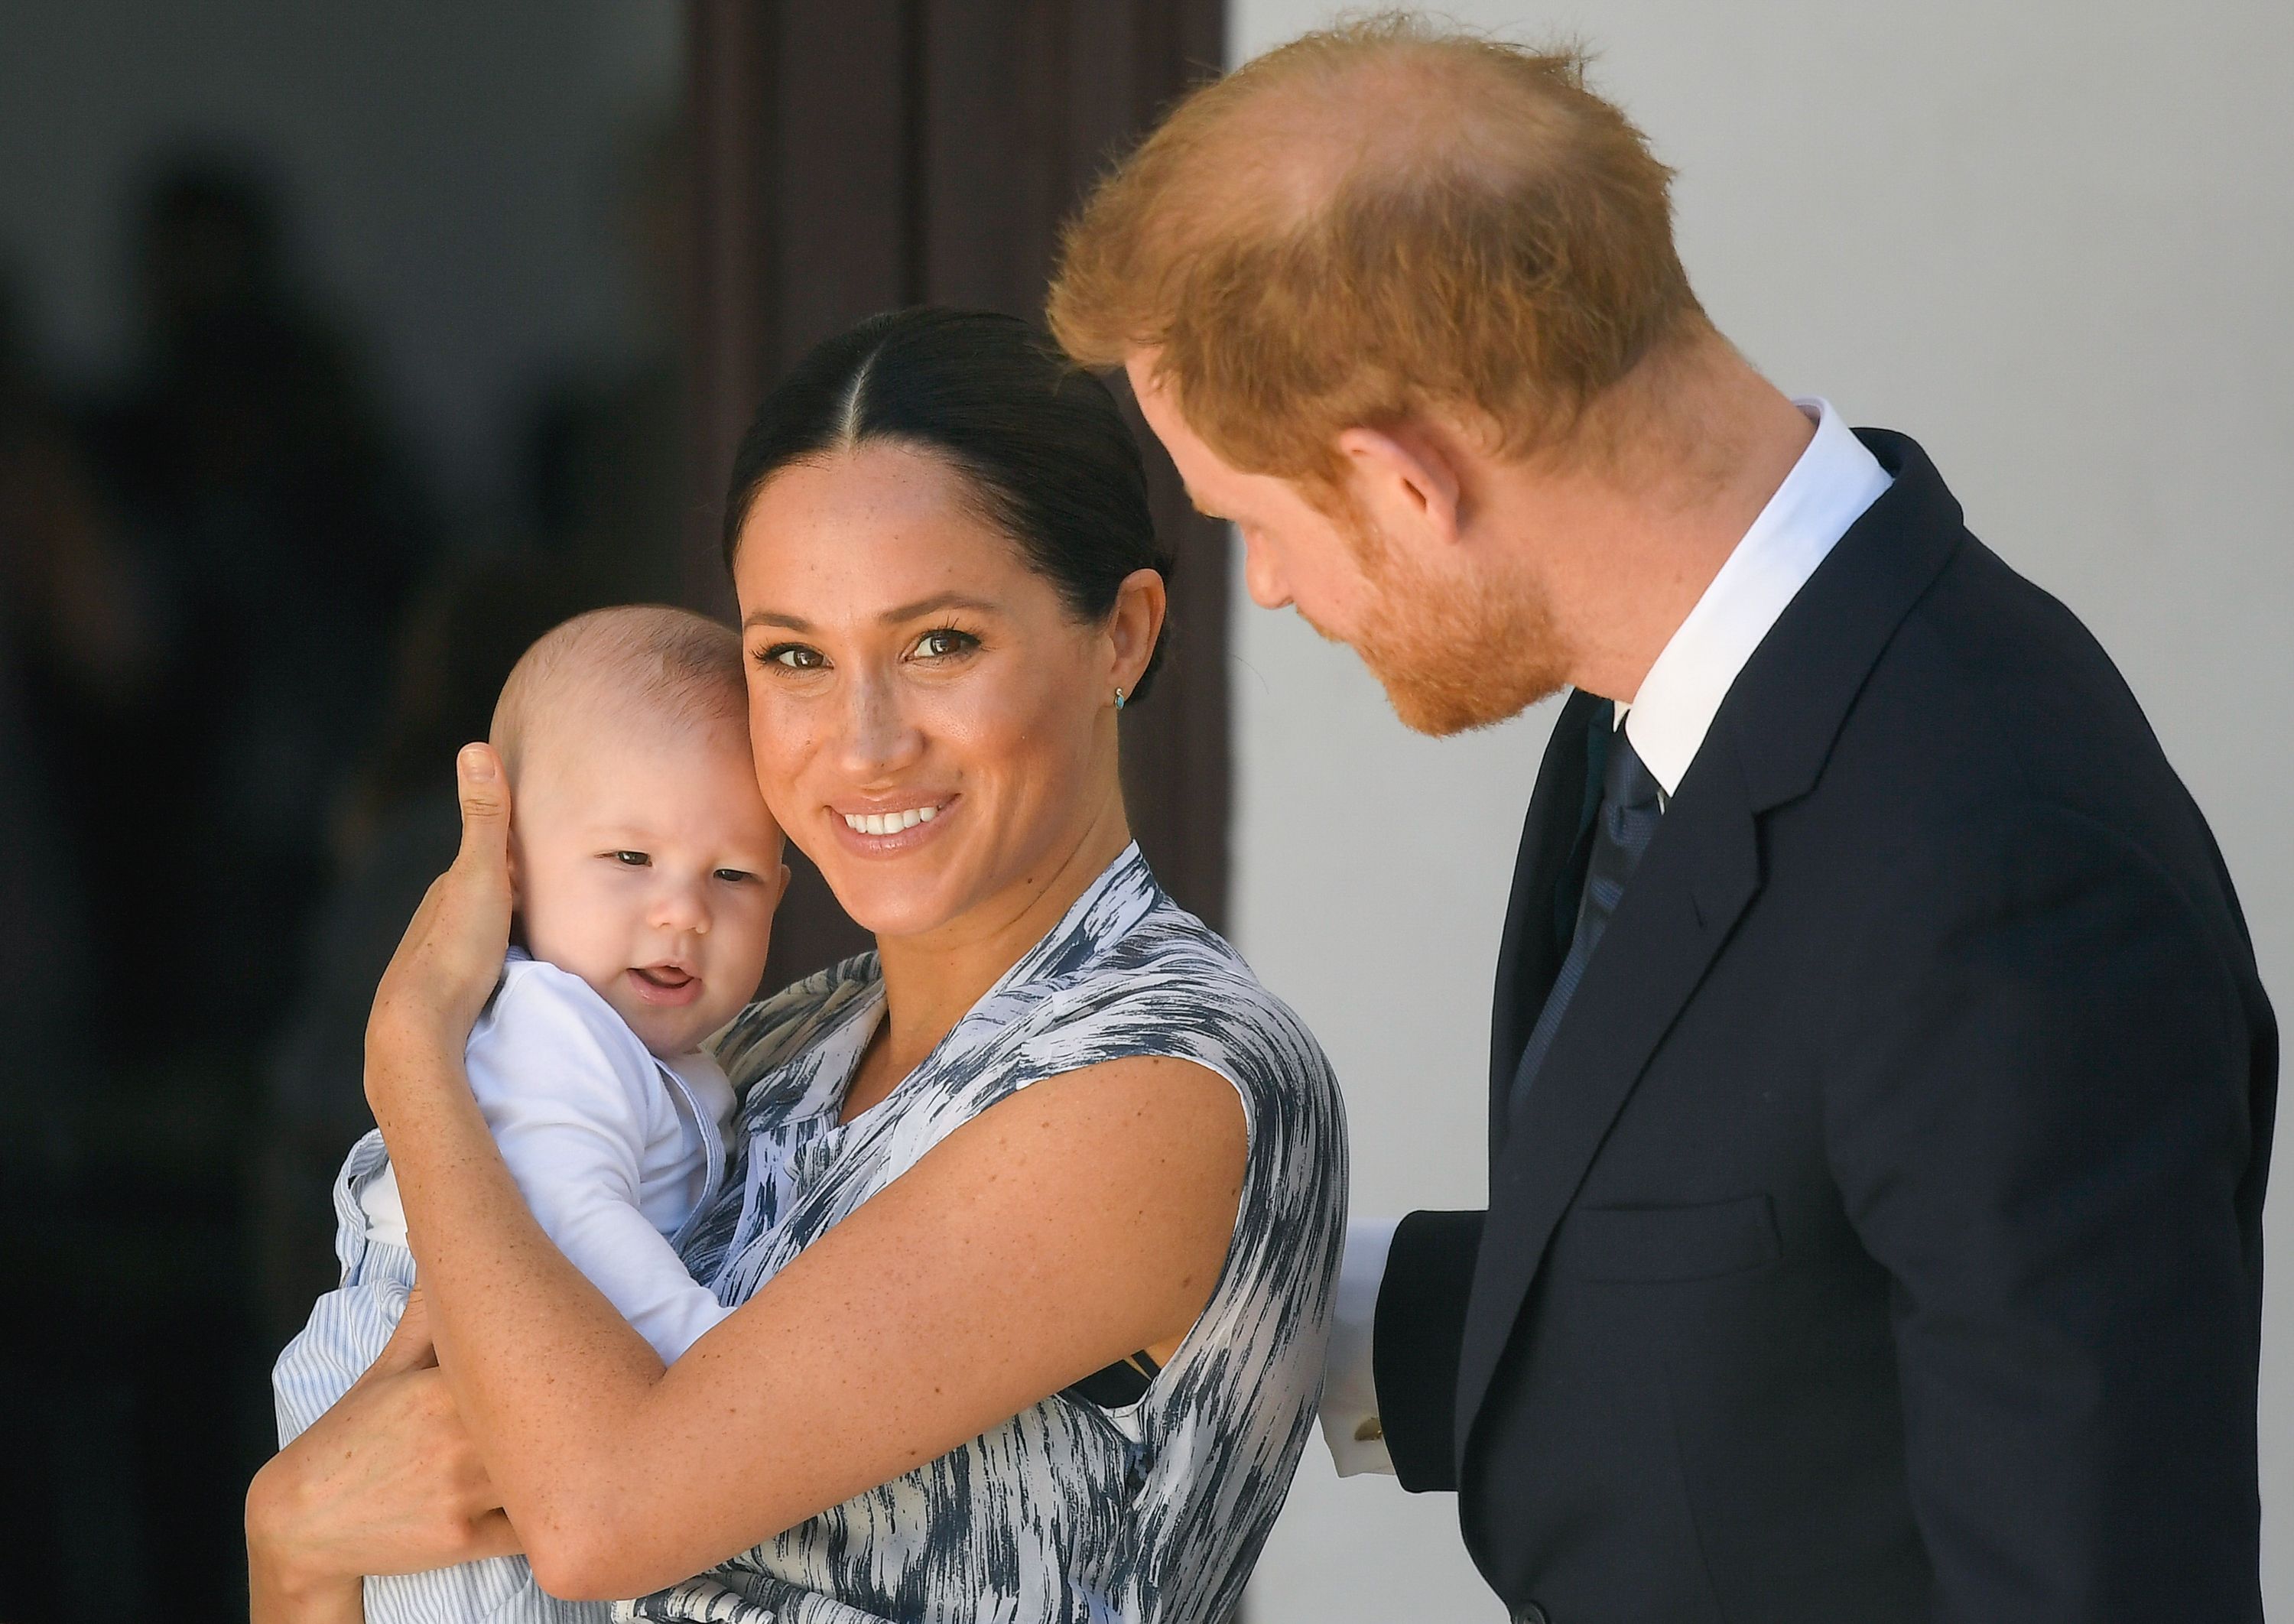 Baby Archie Mountbatten-Windsor, Duchess Meghan, and Prince Harry meet Archbishop Desmond Tutu during their royal tour of South Africa on September 25, 2019, in Cape Town | Photo: Pool/Samir Hussein/WireImage/Getty Images